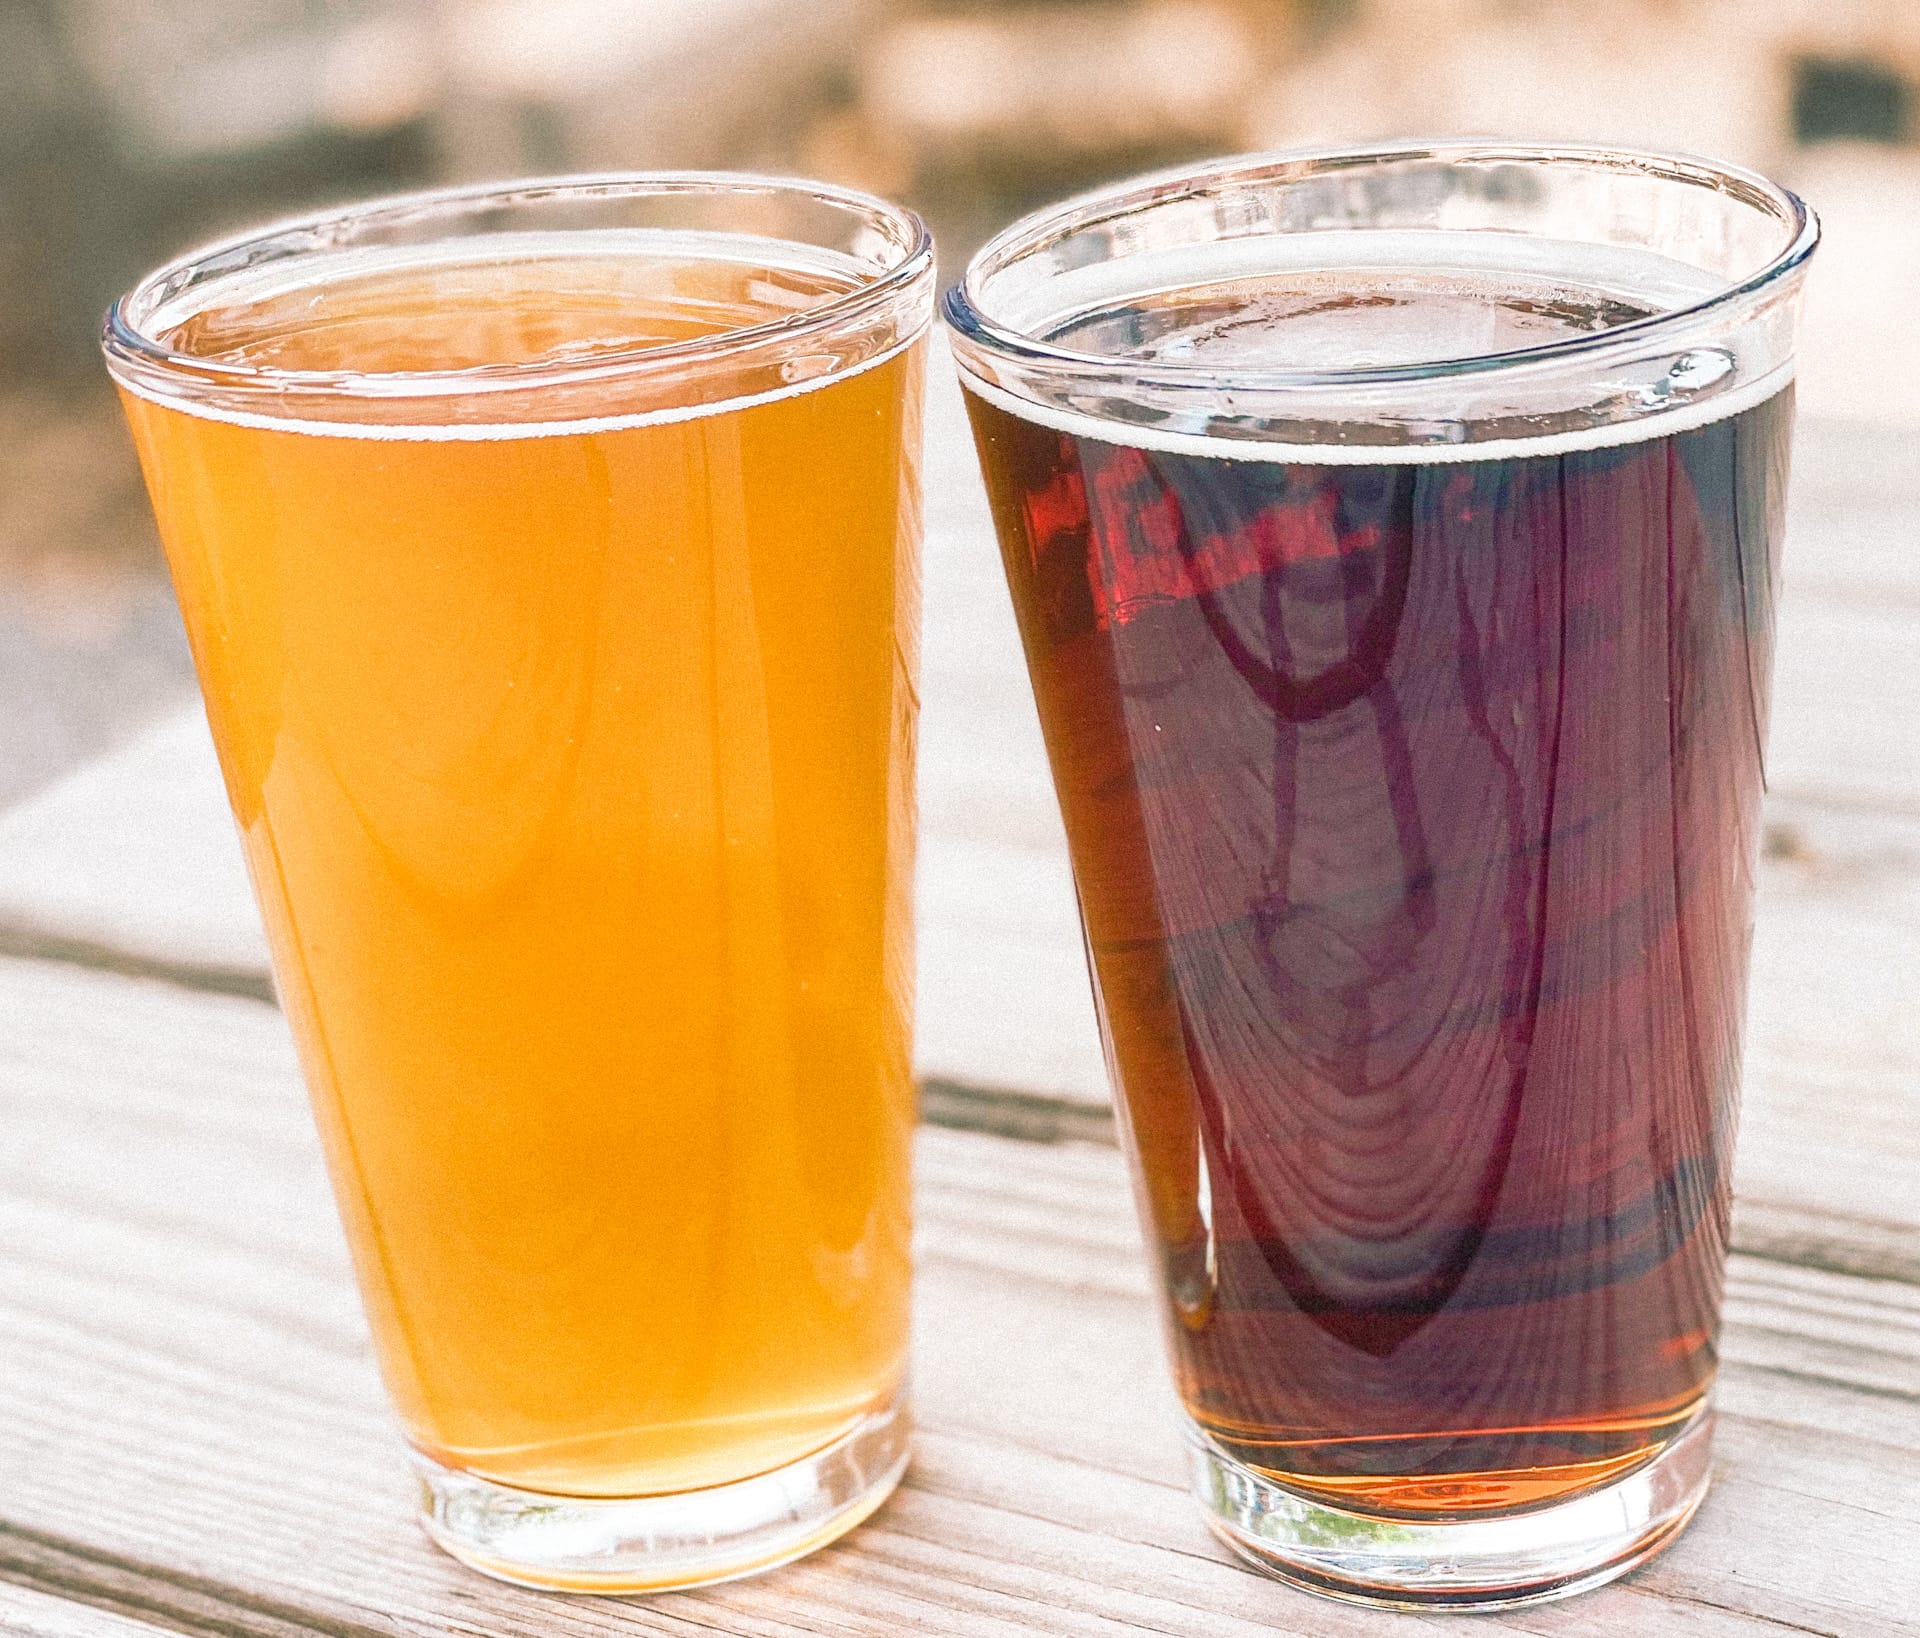 Two glasses of beer, one light golden in color the other dark amber